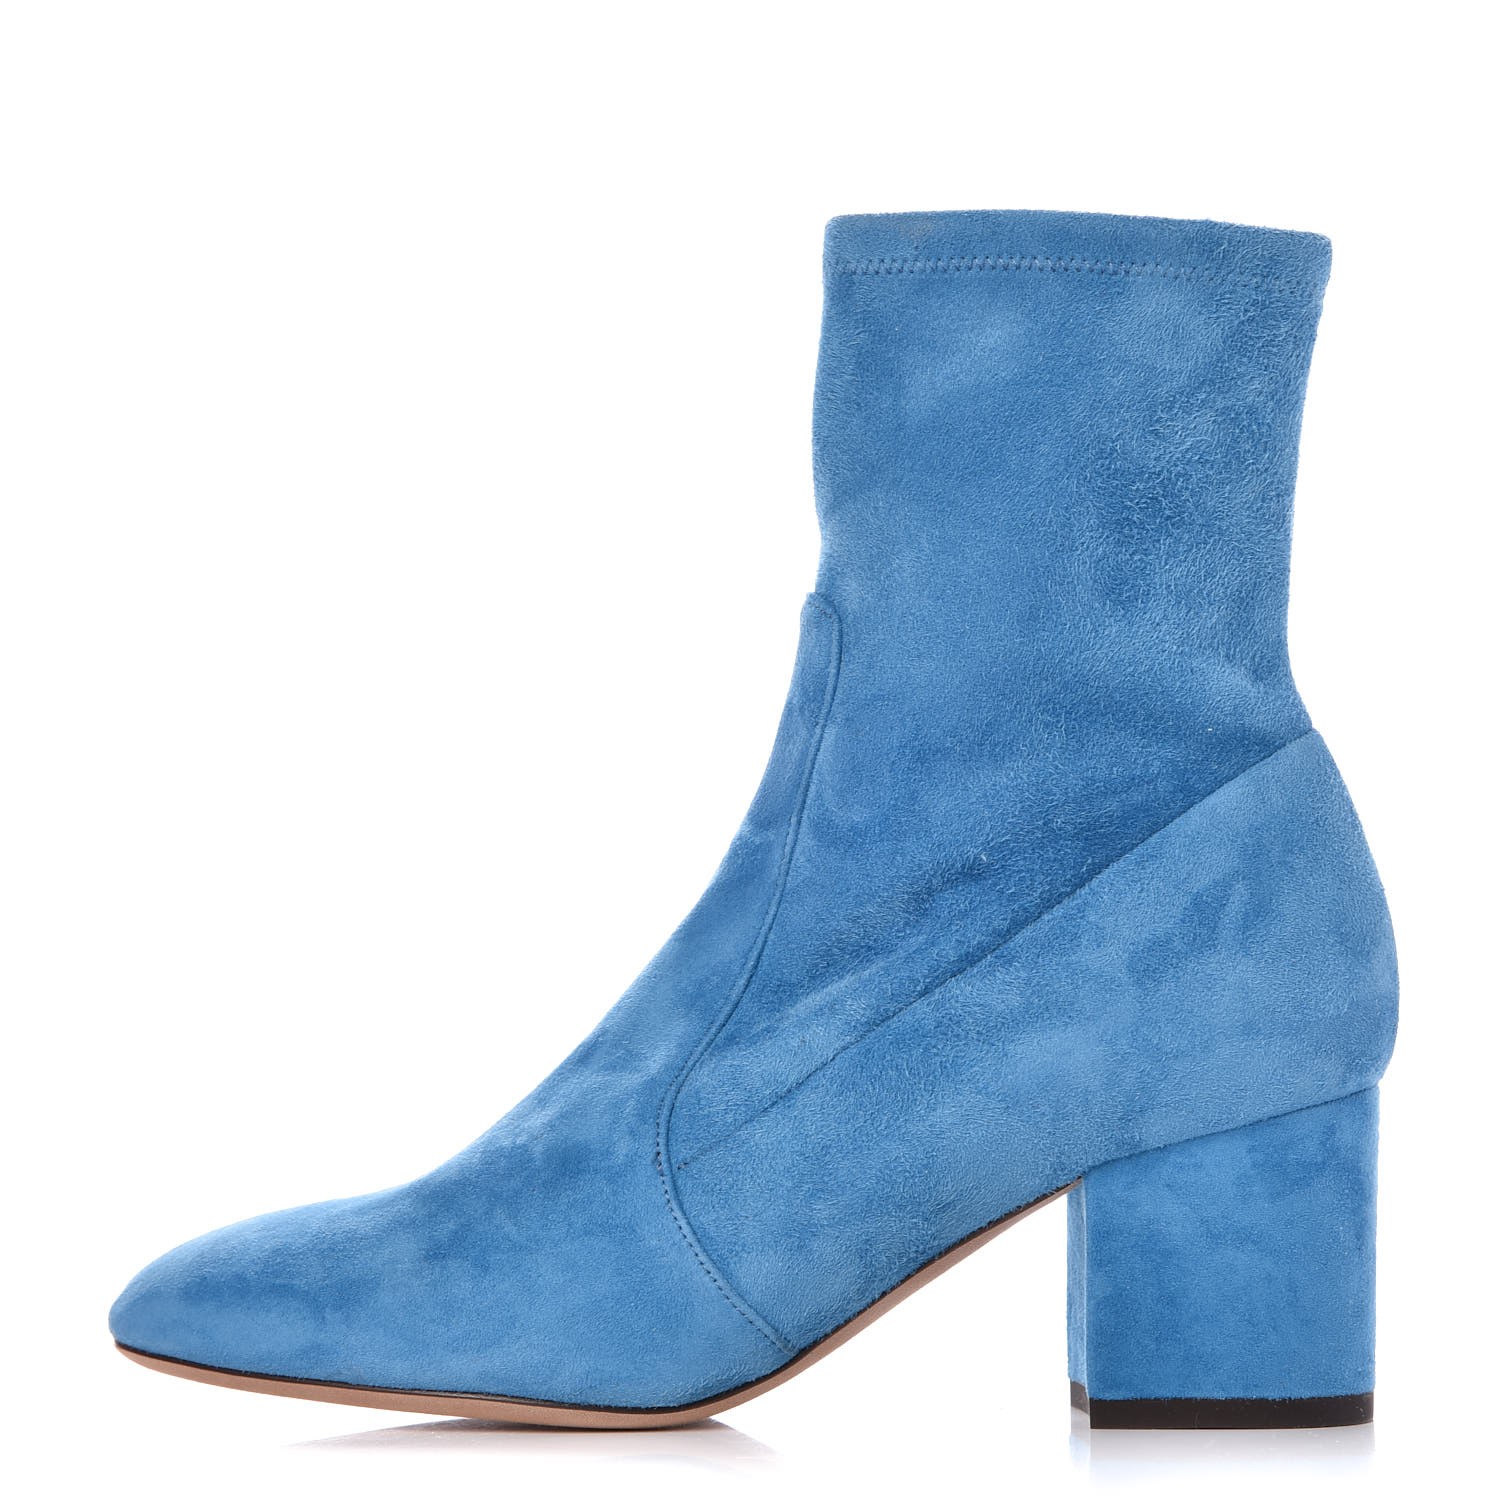 VALENTINO Suede Ankle Boots 36 Light Blue 302376